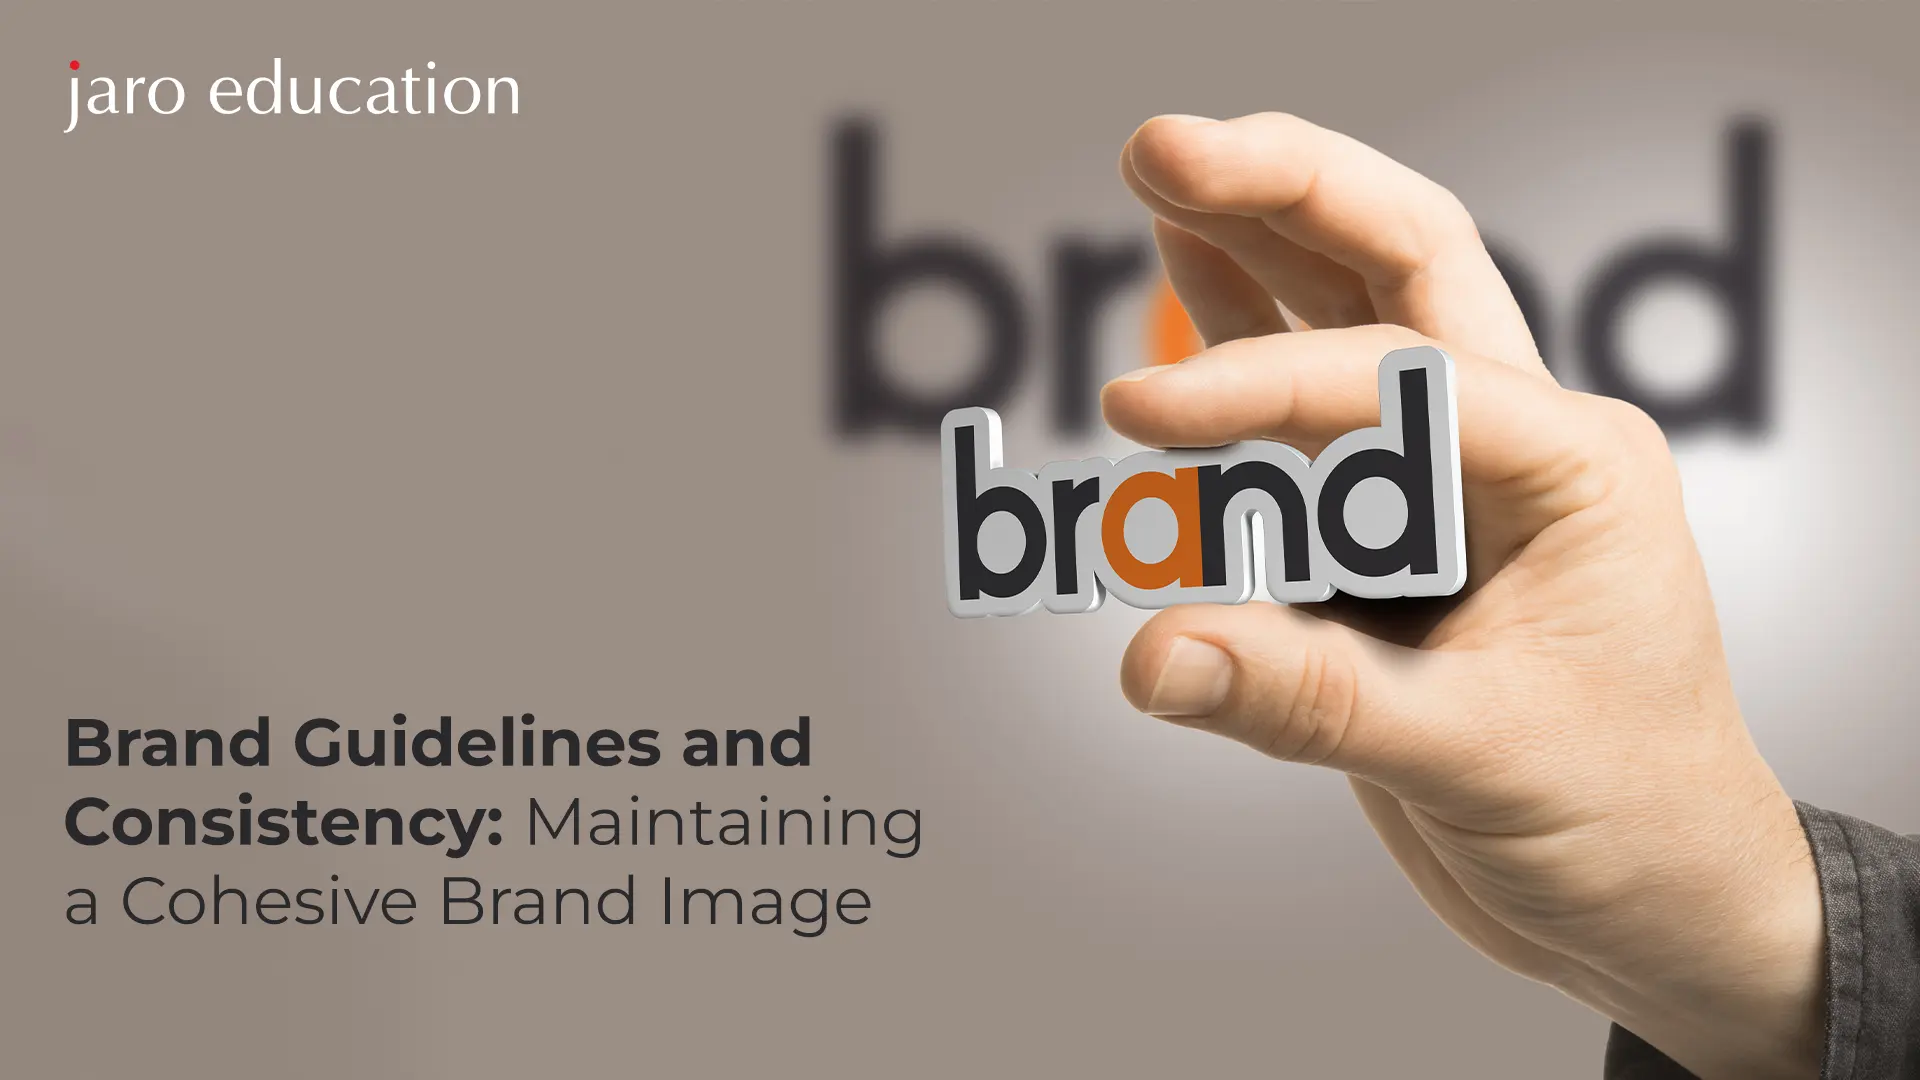 Brand Guidelines and Consistency Maintaining a Cohesive Brand Image